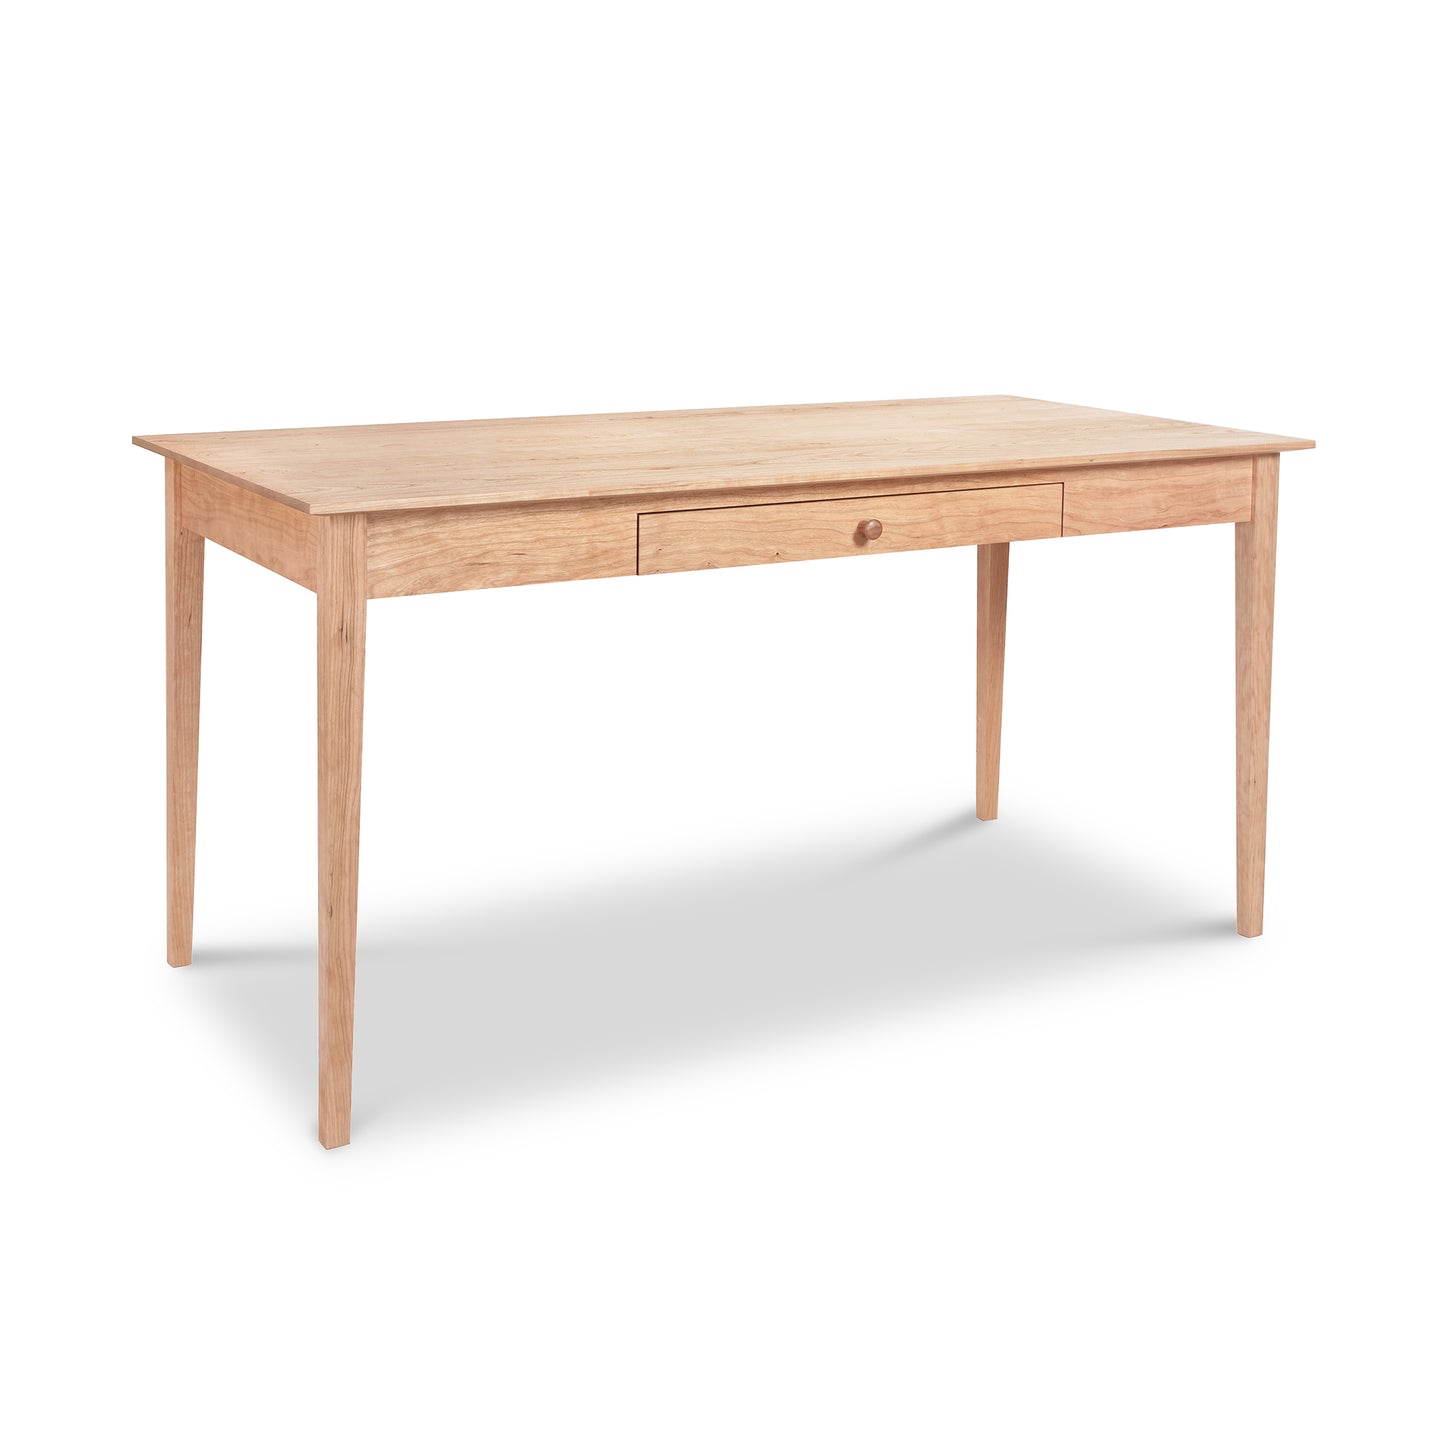 A Maple Corner Woodworks American Shaker writing desk made of natural cherry wood.